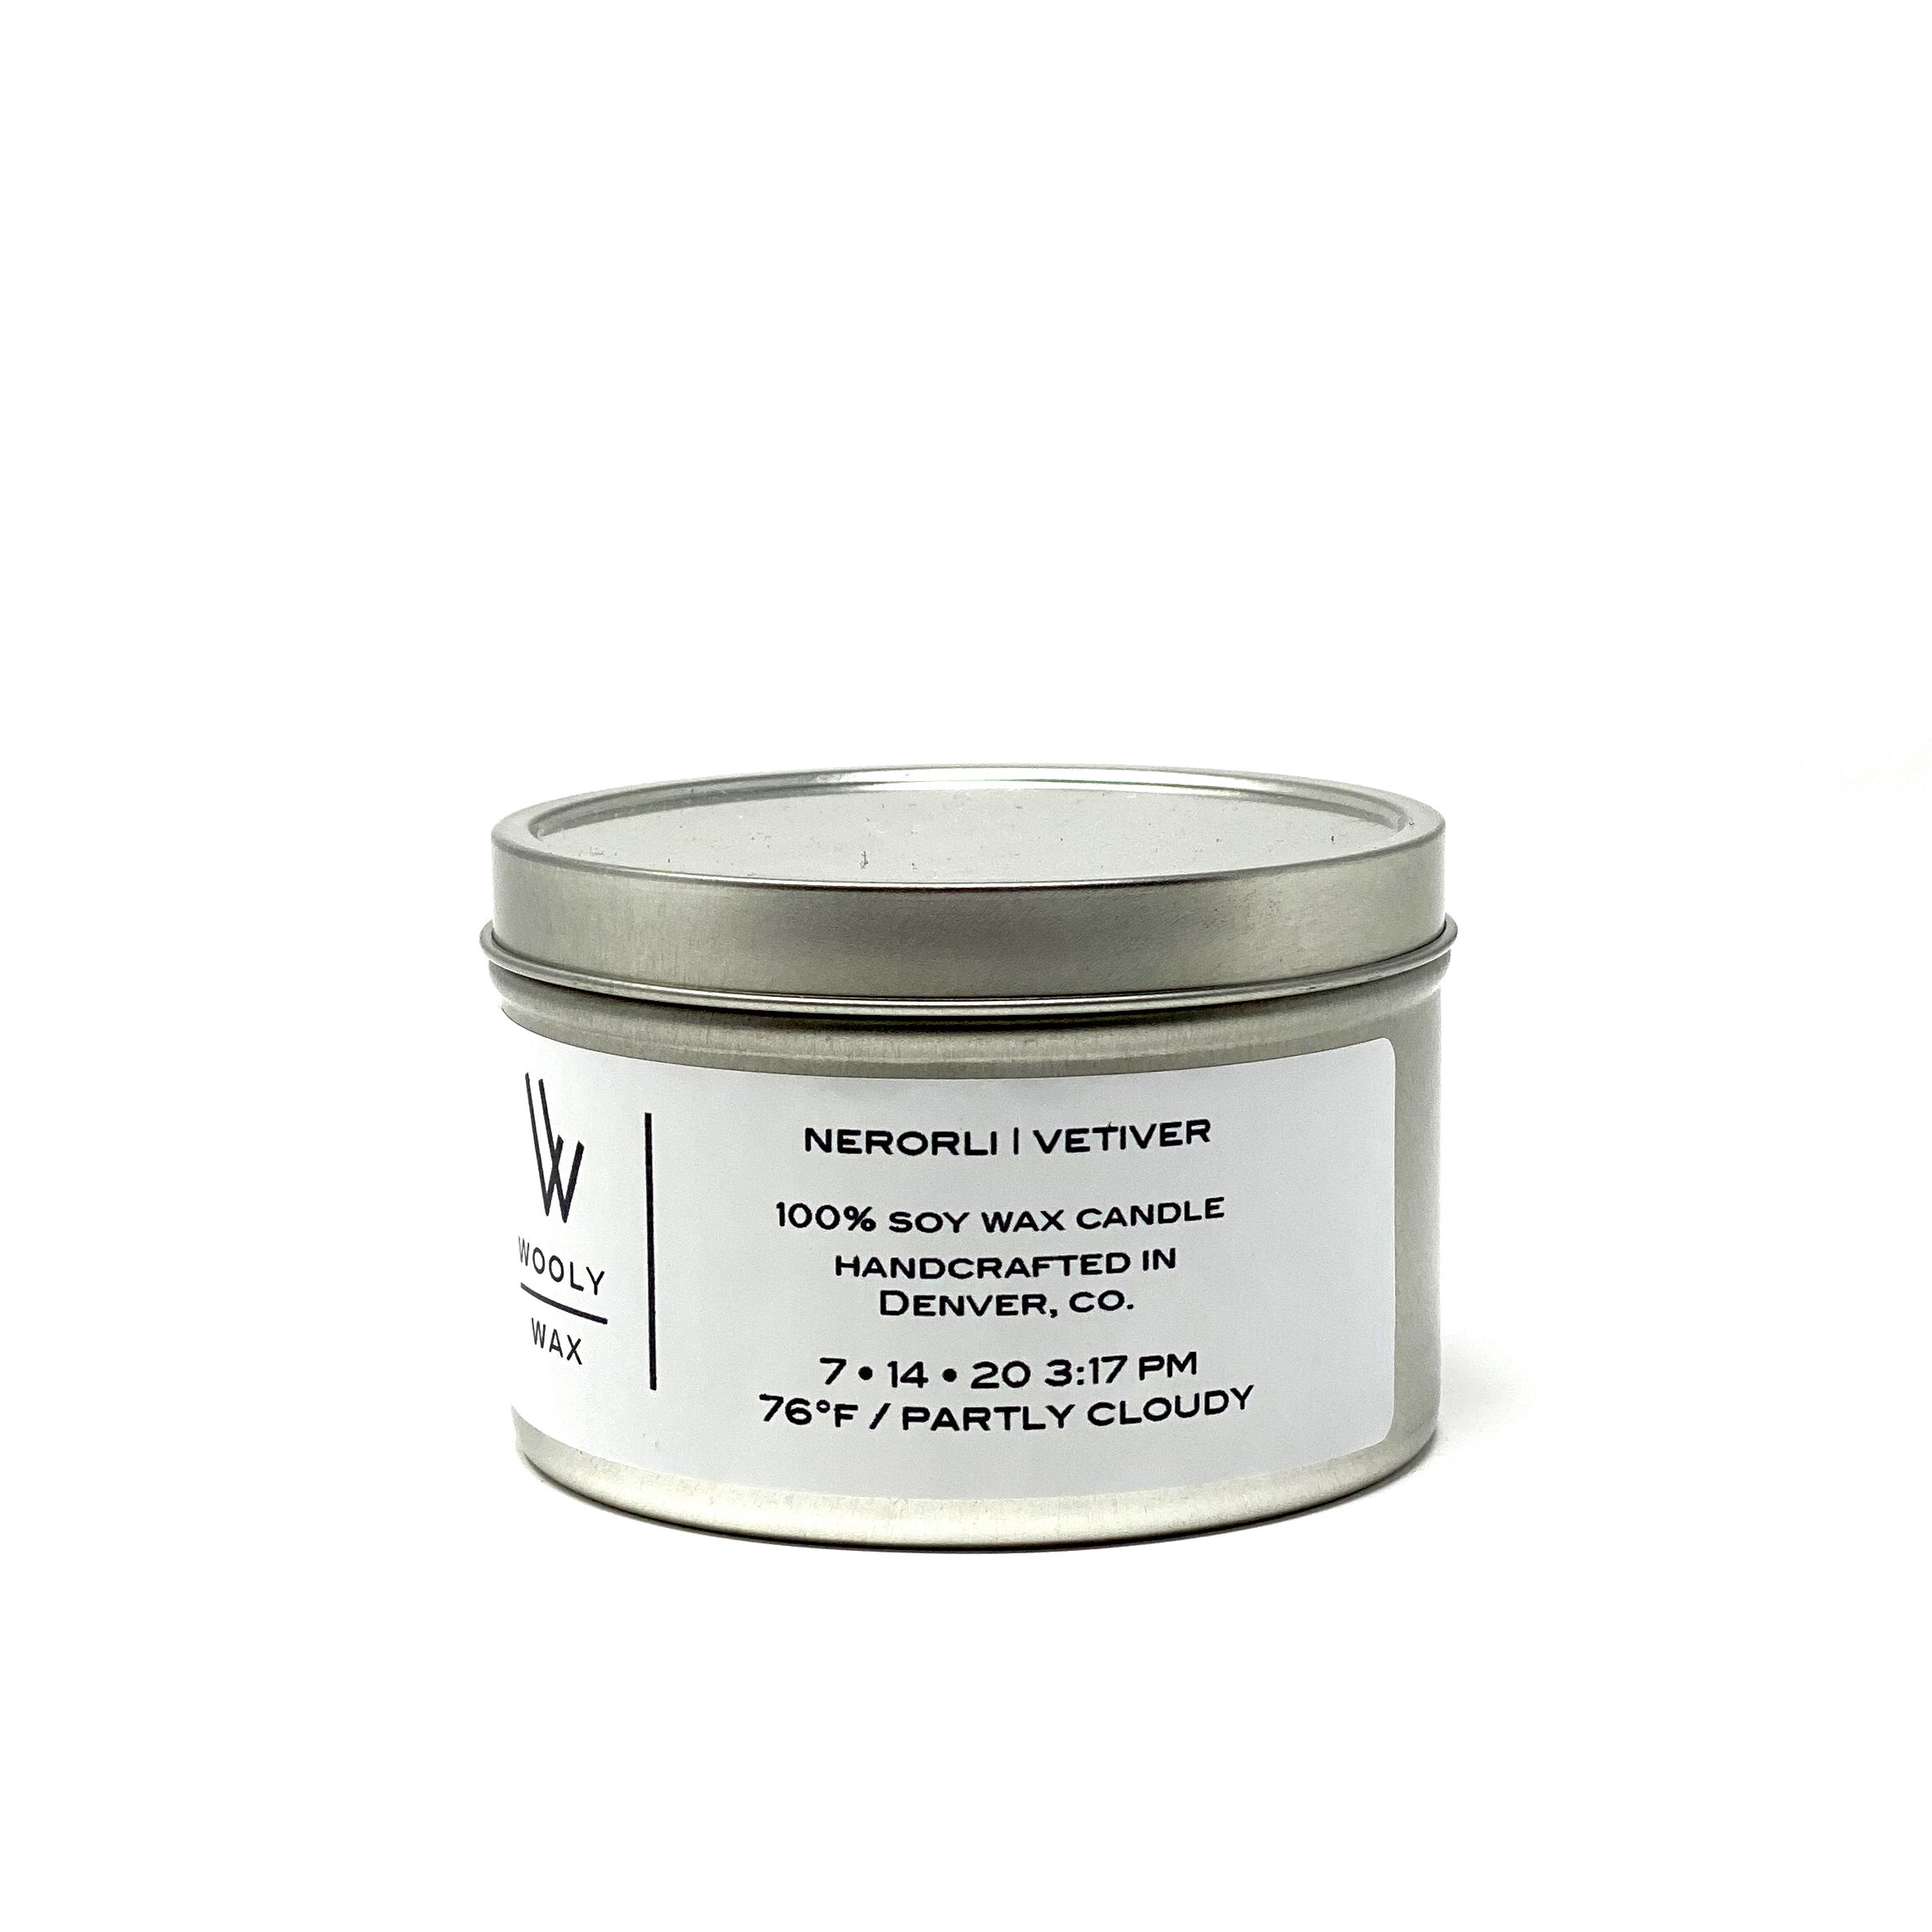 HIGHLY SCENTED 100% NATURAL SOY WAX CANDLE IN TIN 43hr burn time TRAVEL CANDLES 